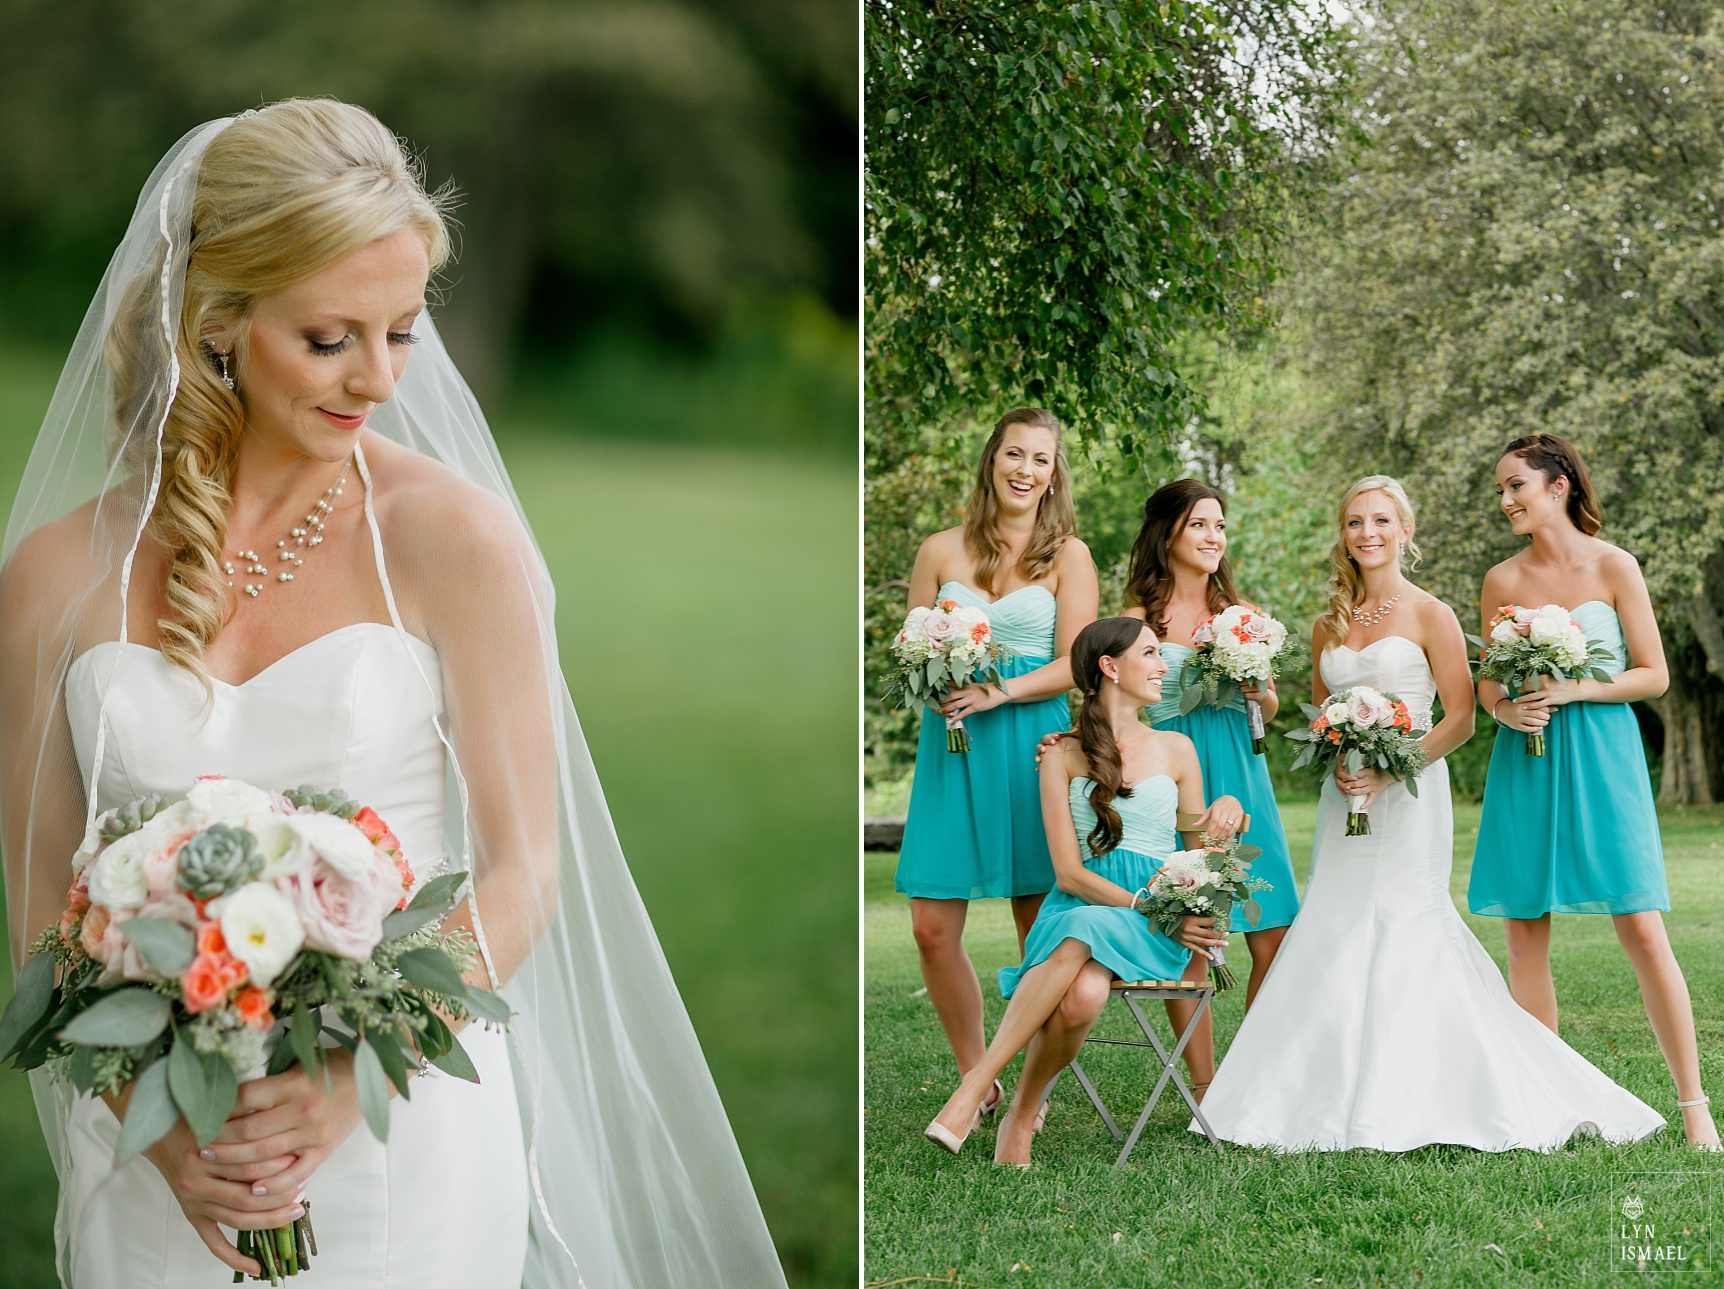 Beautiful bride with a long veil with bridesmaids wearing mint and aqua bridesmaid dresses.